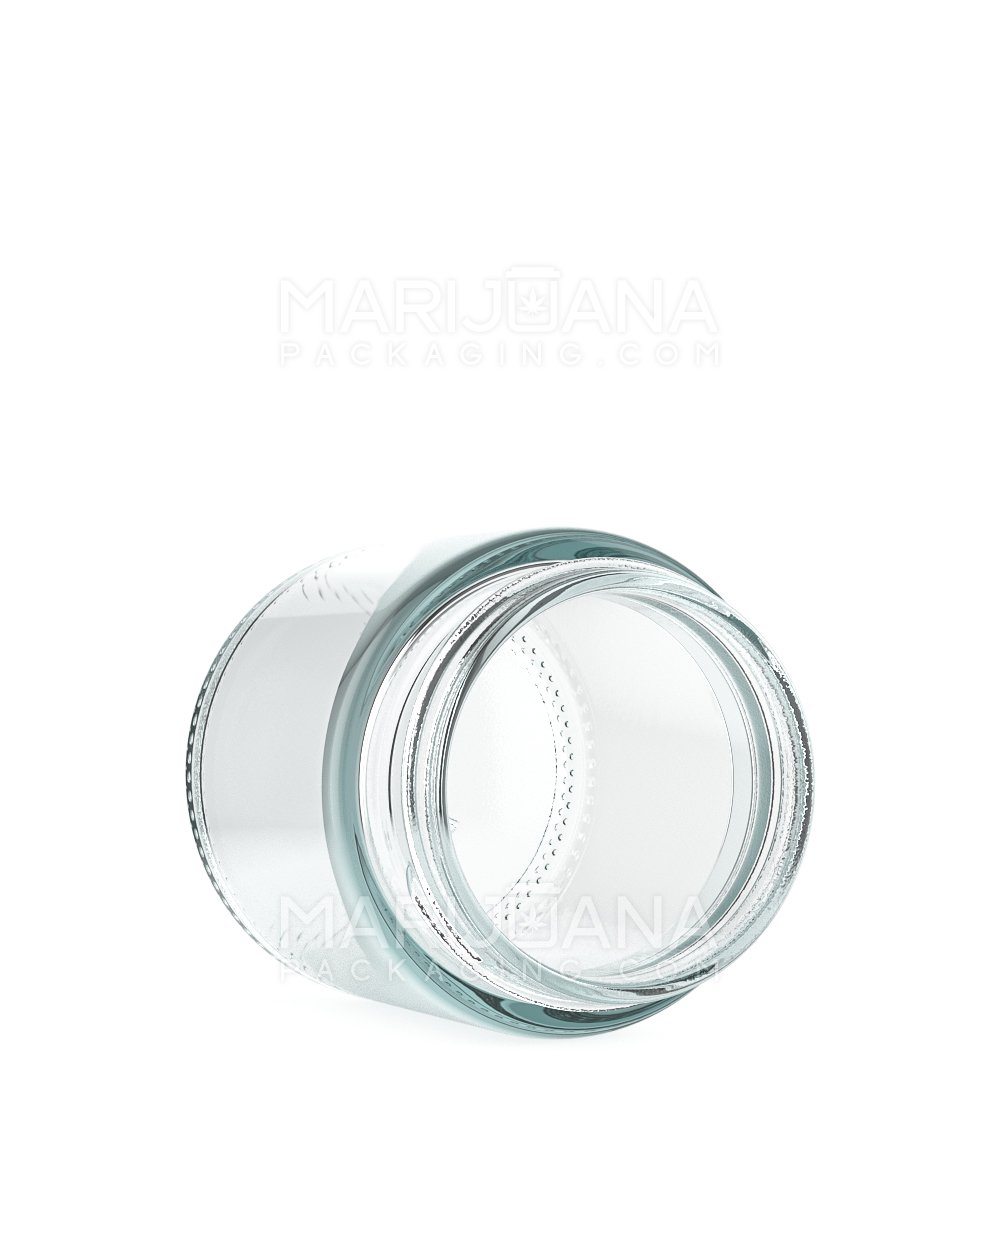 Child Resistant | Straight Sided Clear Glass Jars with Black Cap | 53mm - 3oz - 150 Count - 4